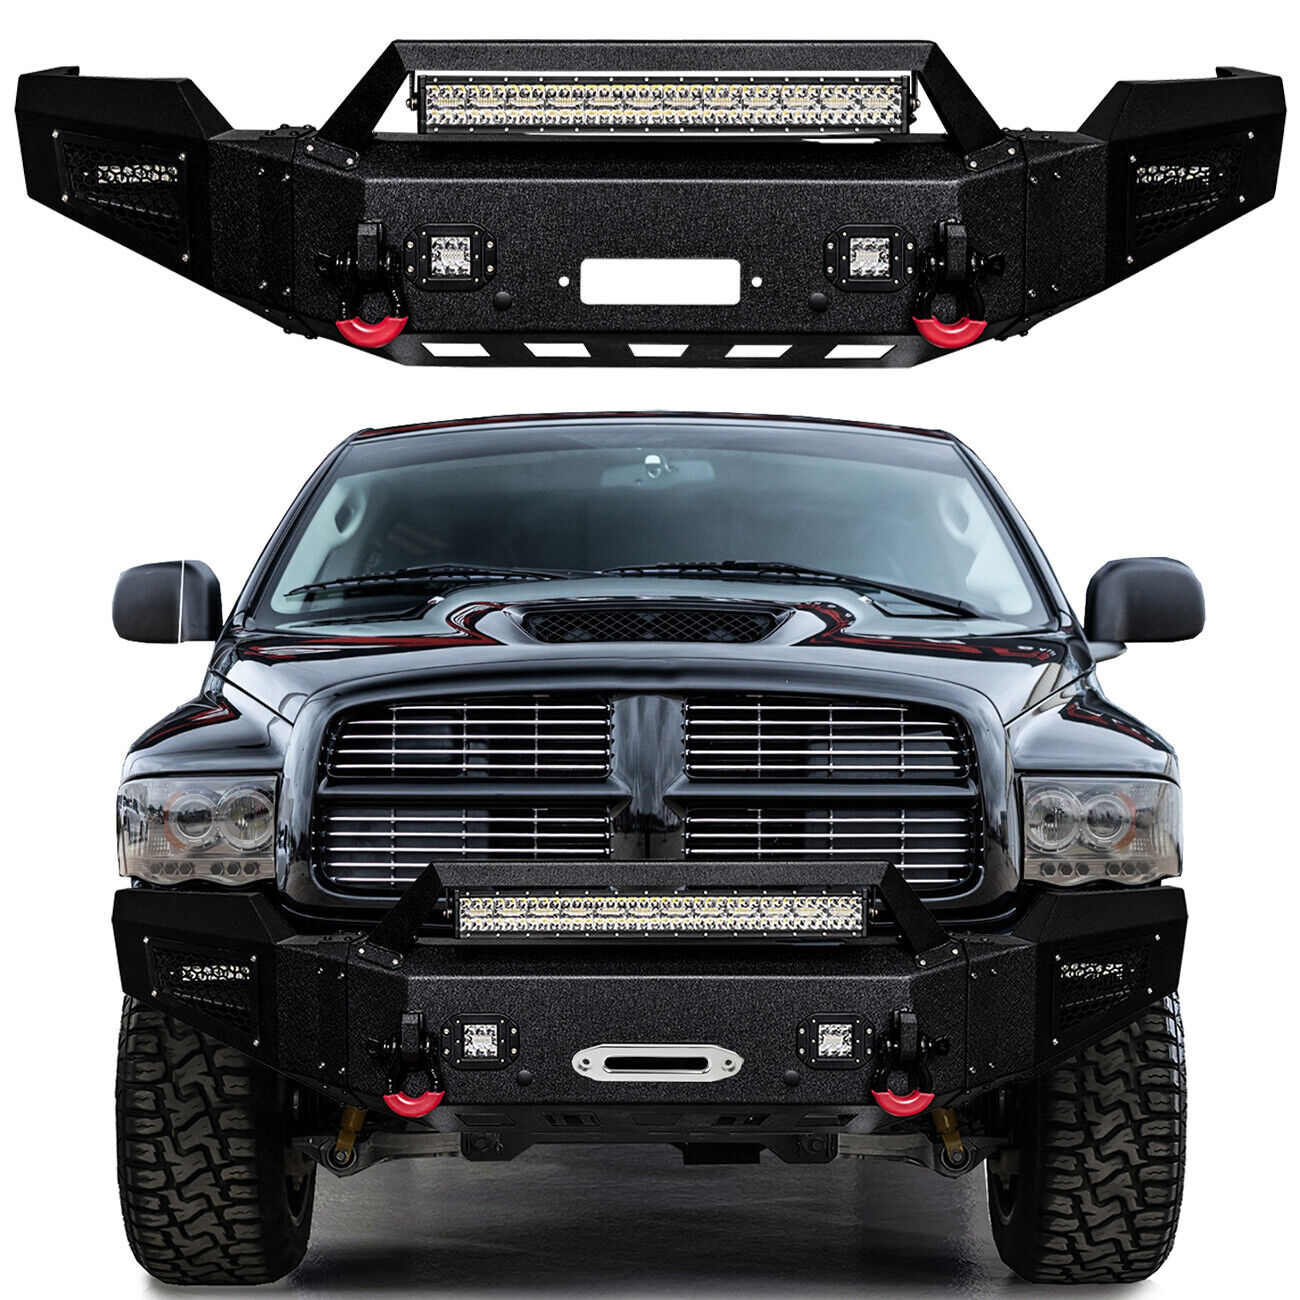 Vijay For 2003-2005 Dodge Ram 2500 3500 Front or Rear Bumper with Lights